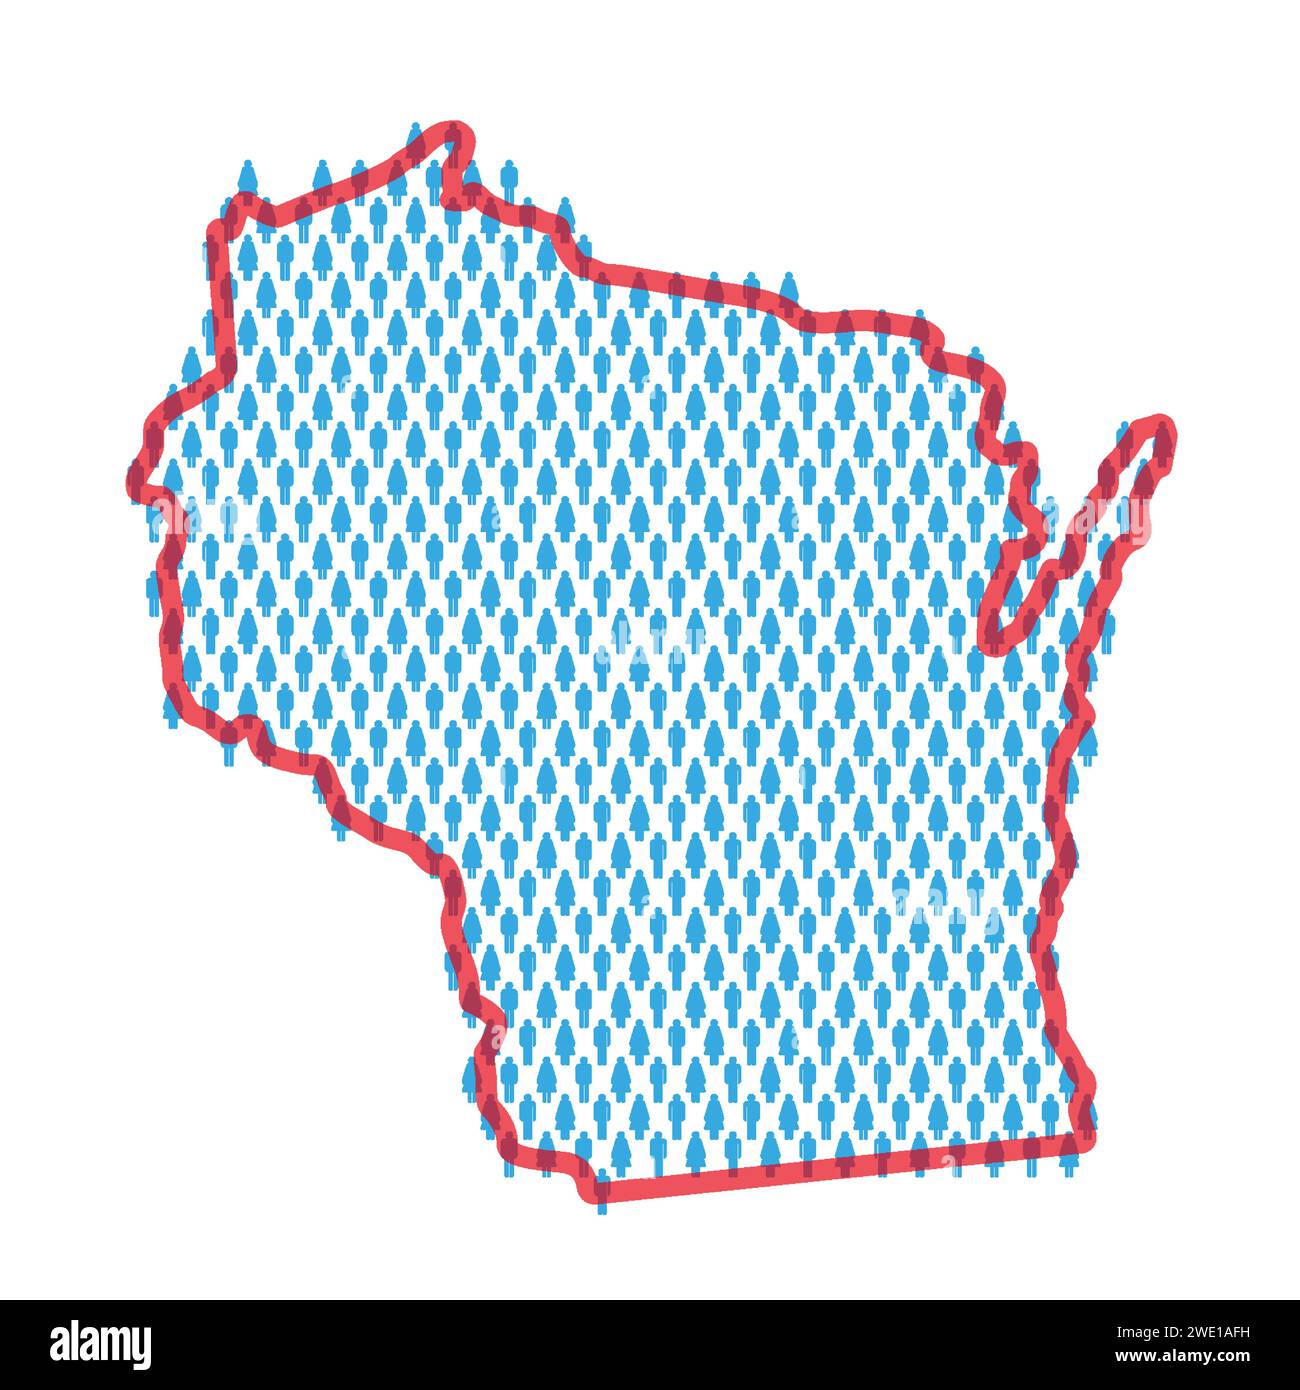 Wisconsin population map. Stick figures people map with bold red translucent state border. Pattern of men and women icons. Isolated vector illustratio Stock Vector